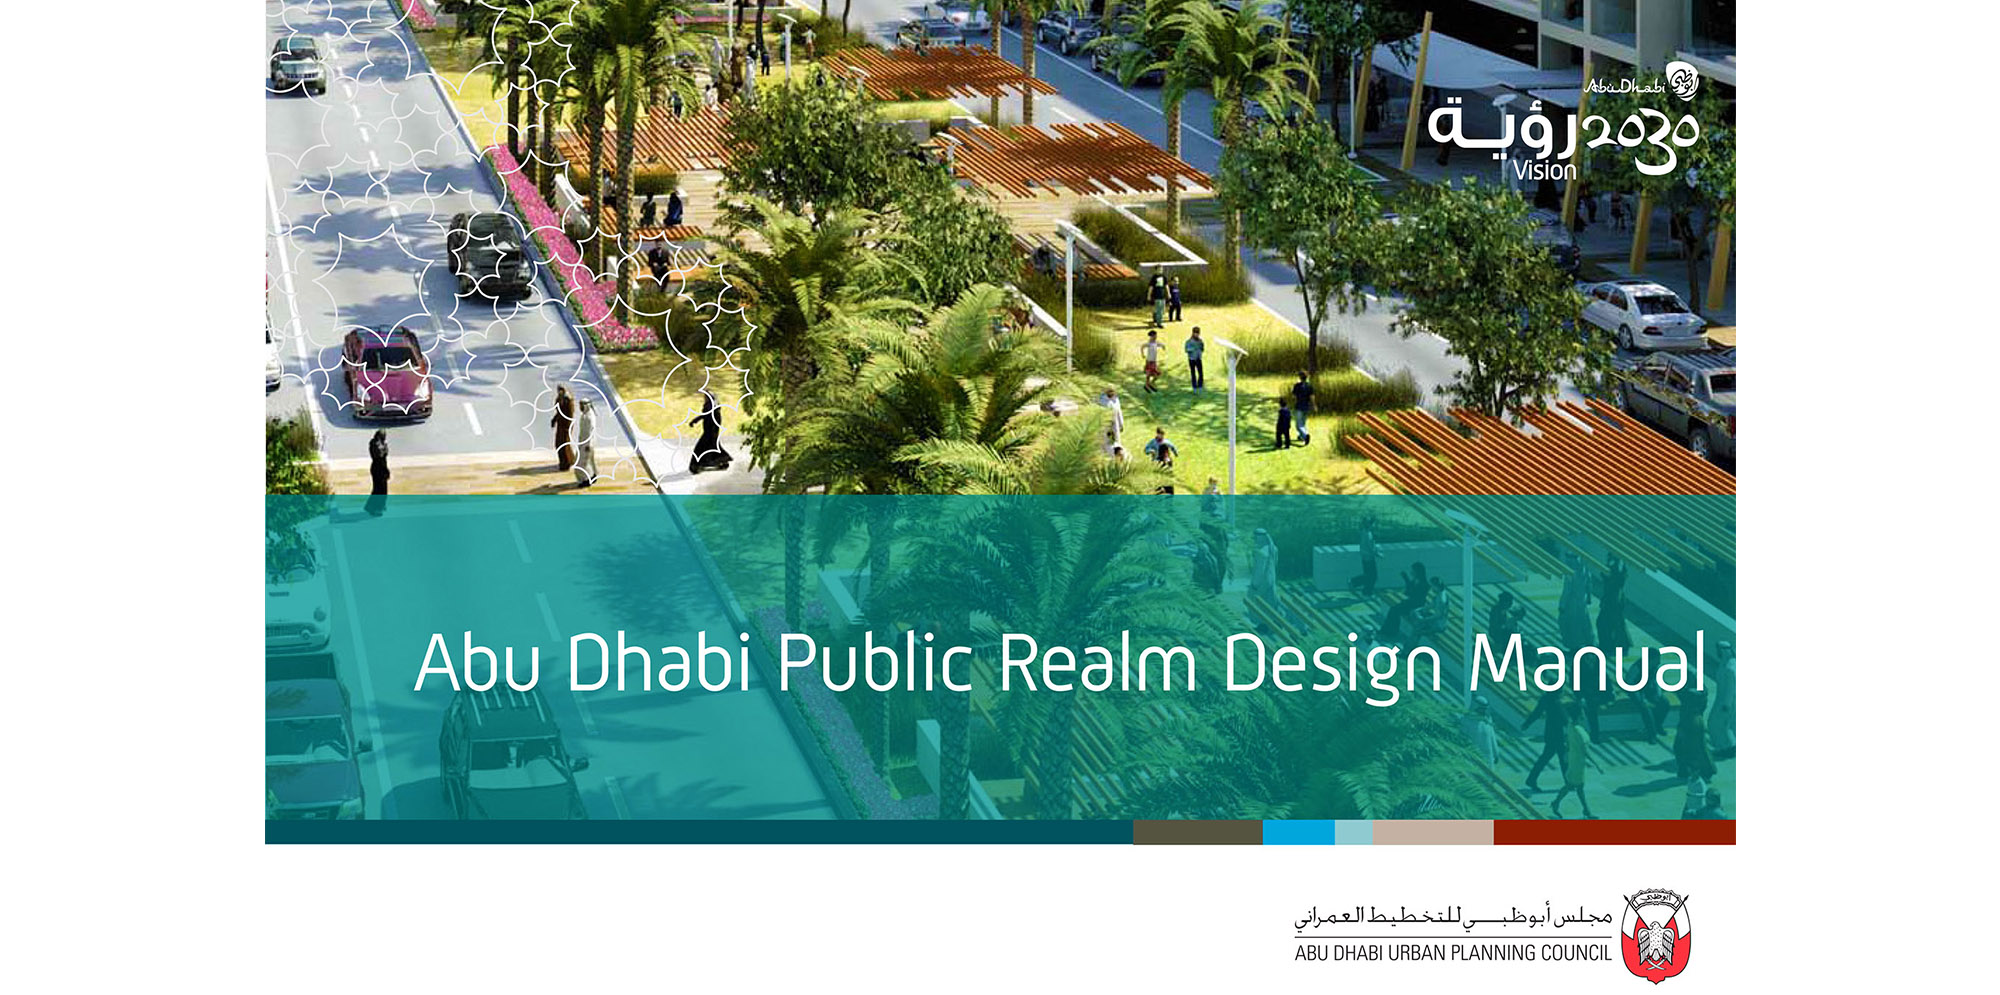 Cover of Abu Dhabi Public Realm Design Manual. For full text, download project PDF below.